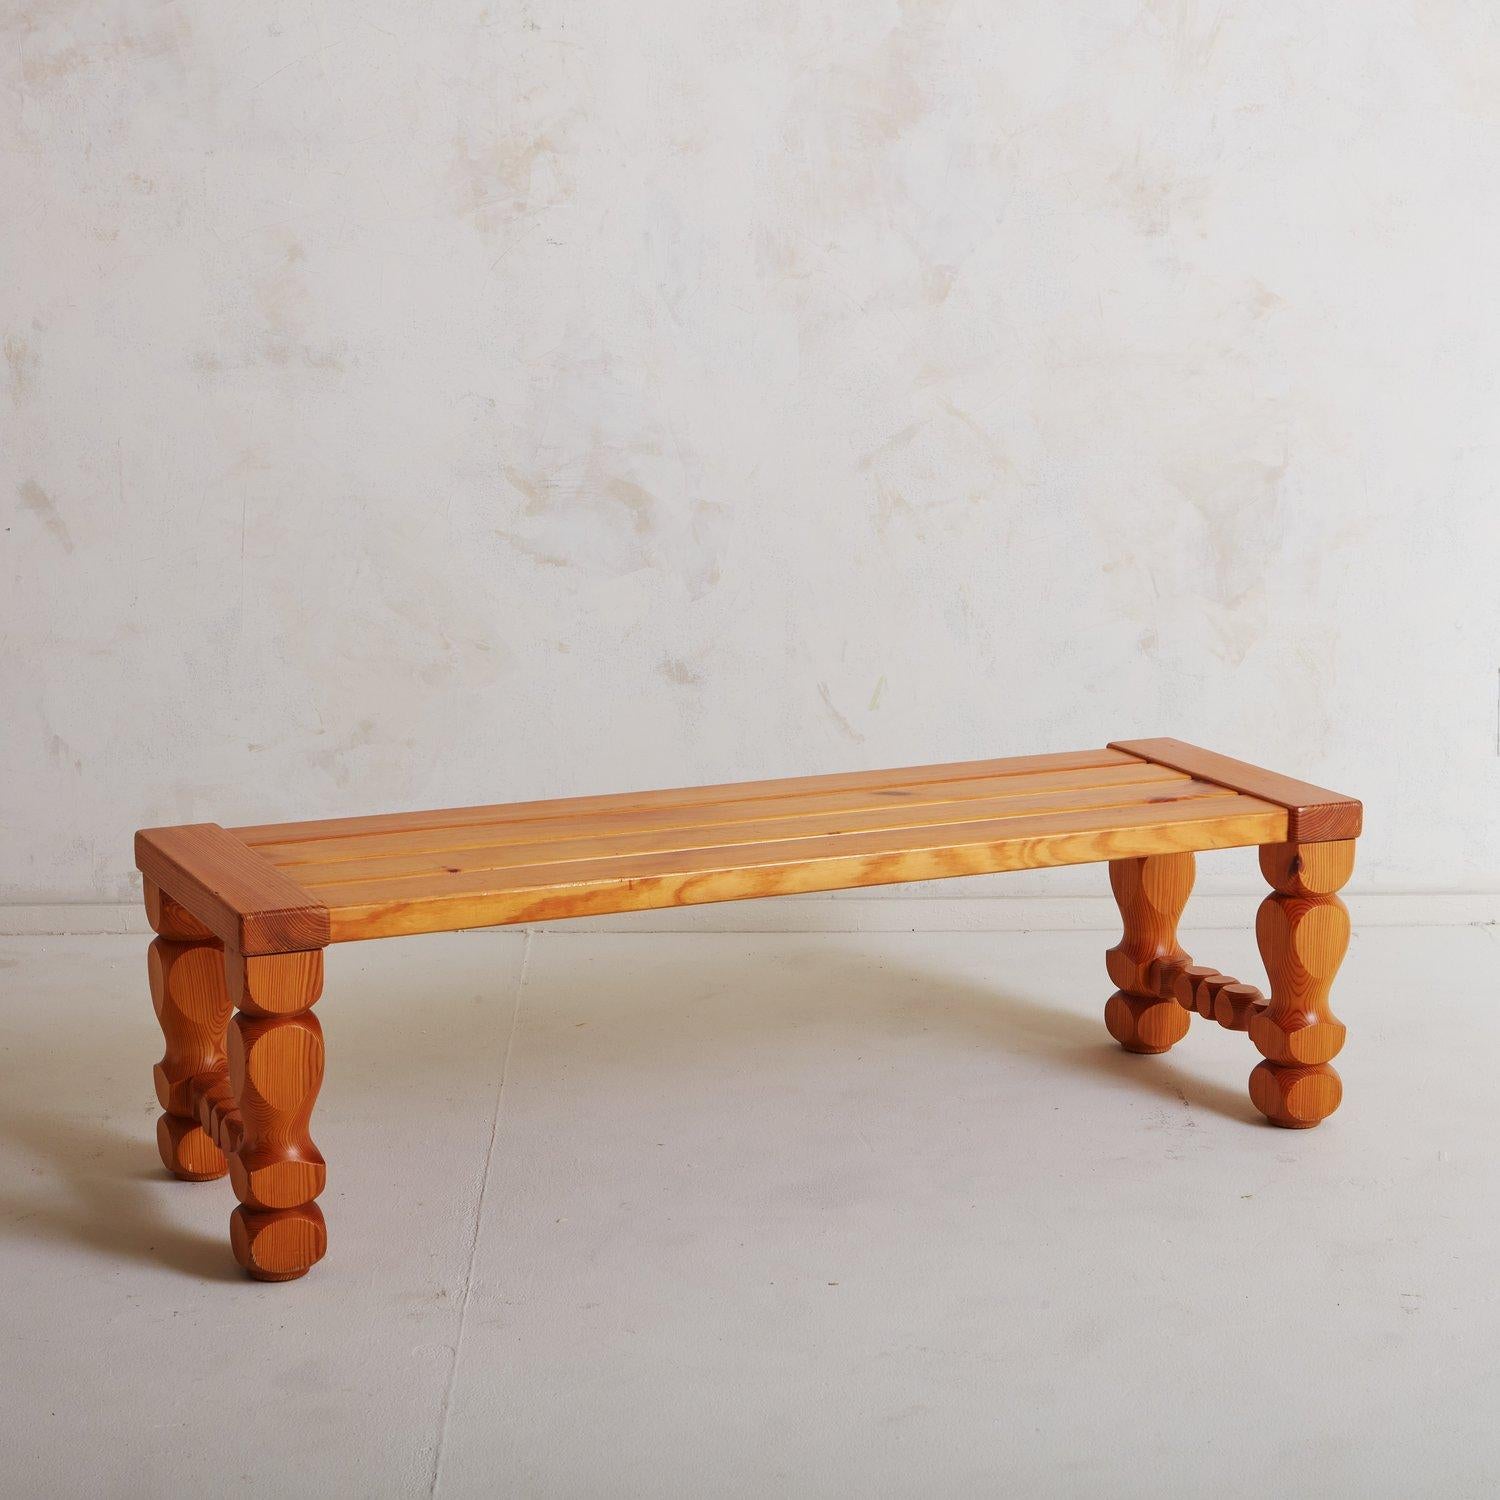 A brutalist 1970s Swedish bench by Glas Mäster Markaryd featuring intricately carved geometric legs with stretcher details. This bench has a slatted top constructed with four pine boards. We love the sculptural detailing and rich graining on this